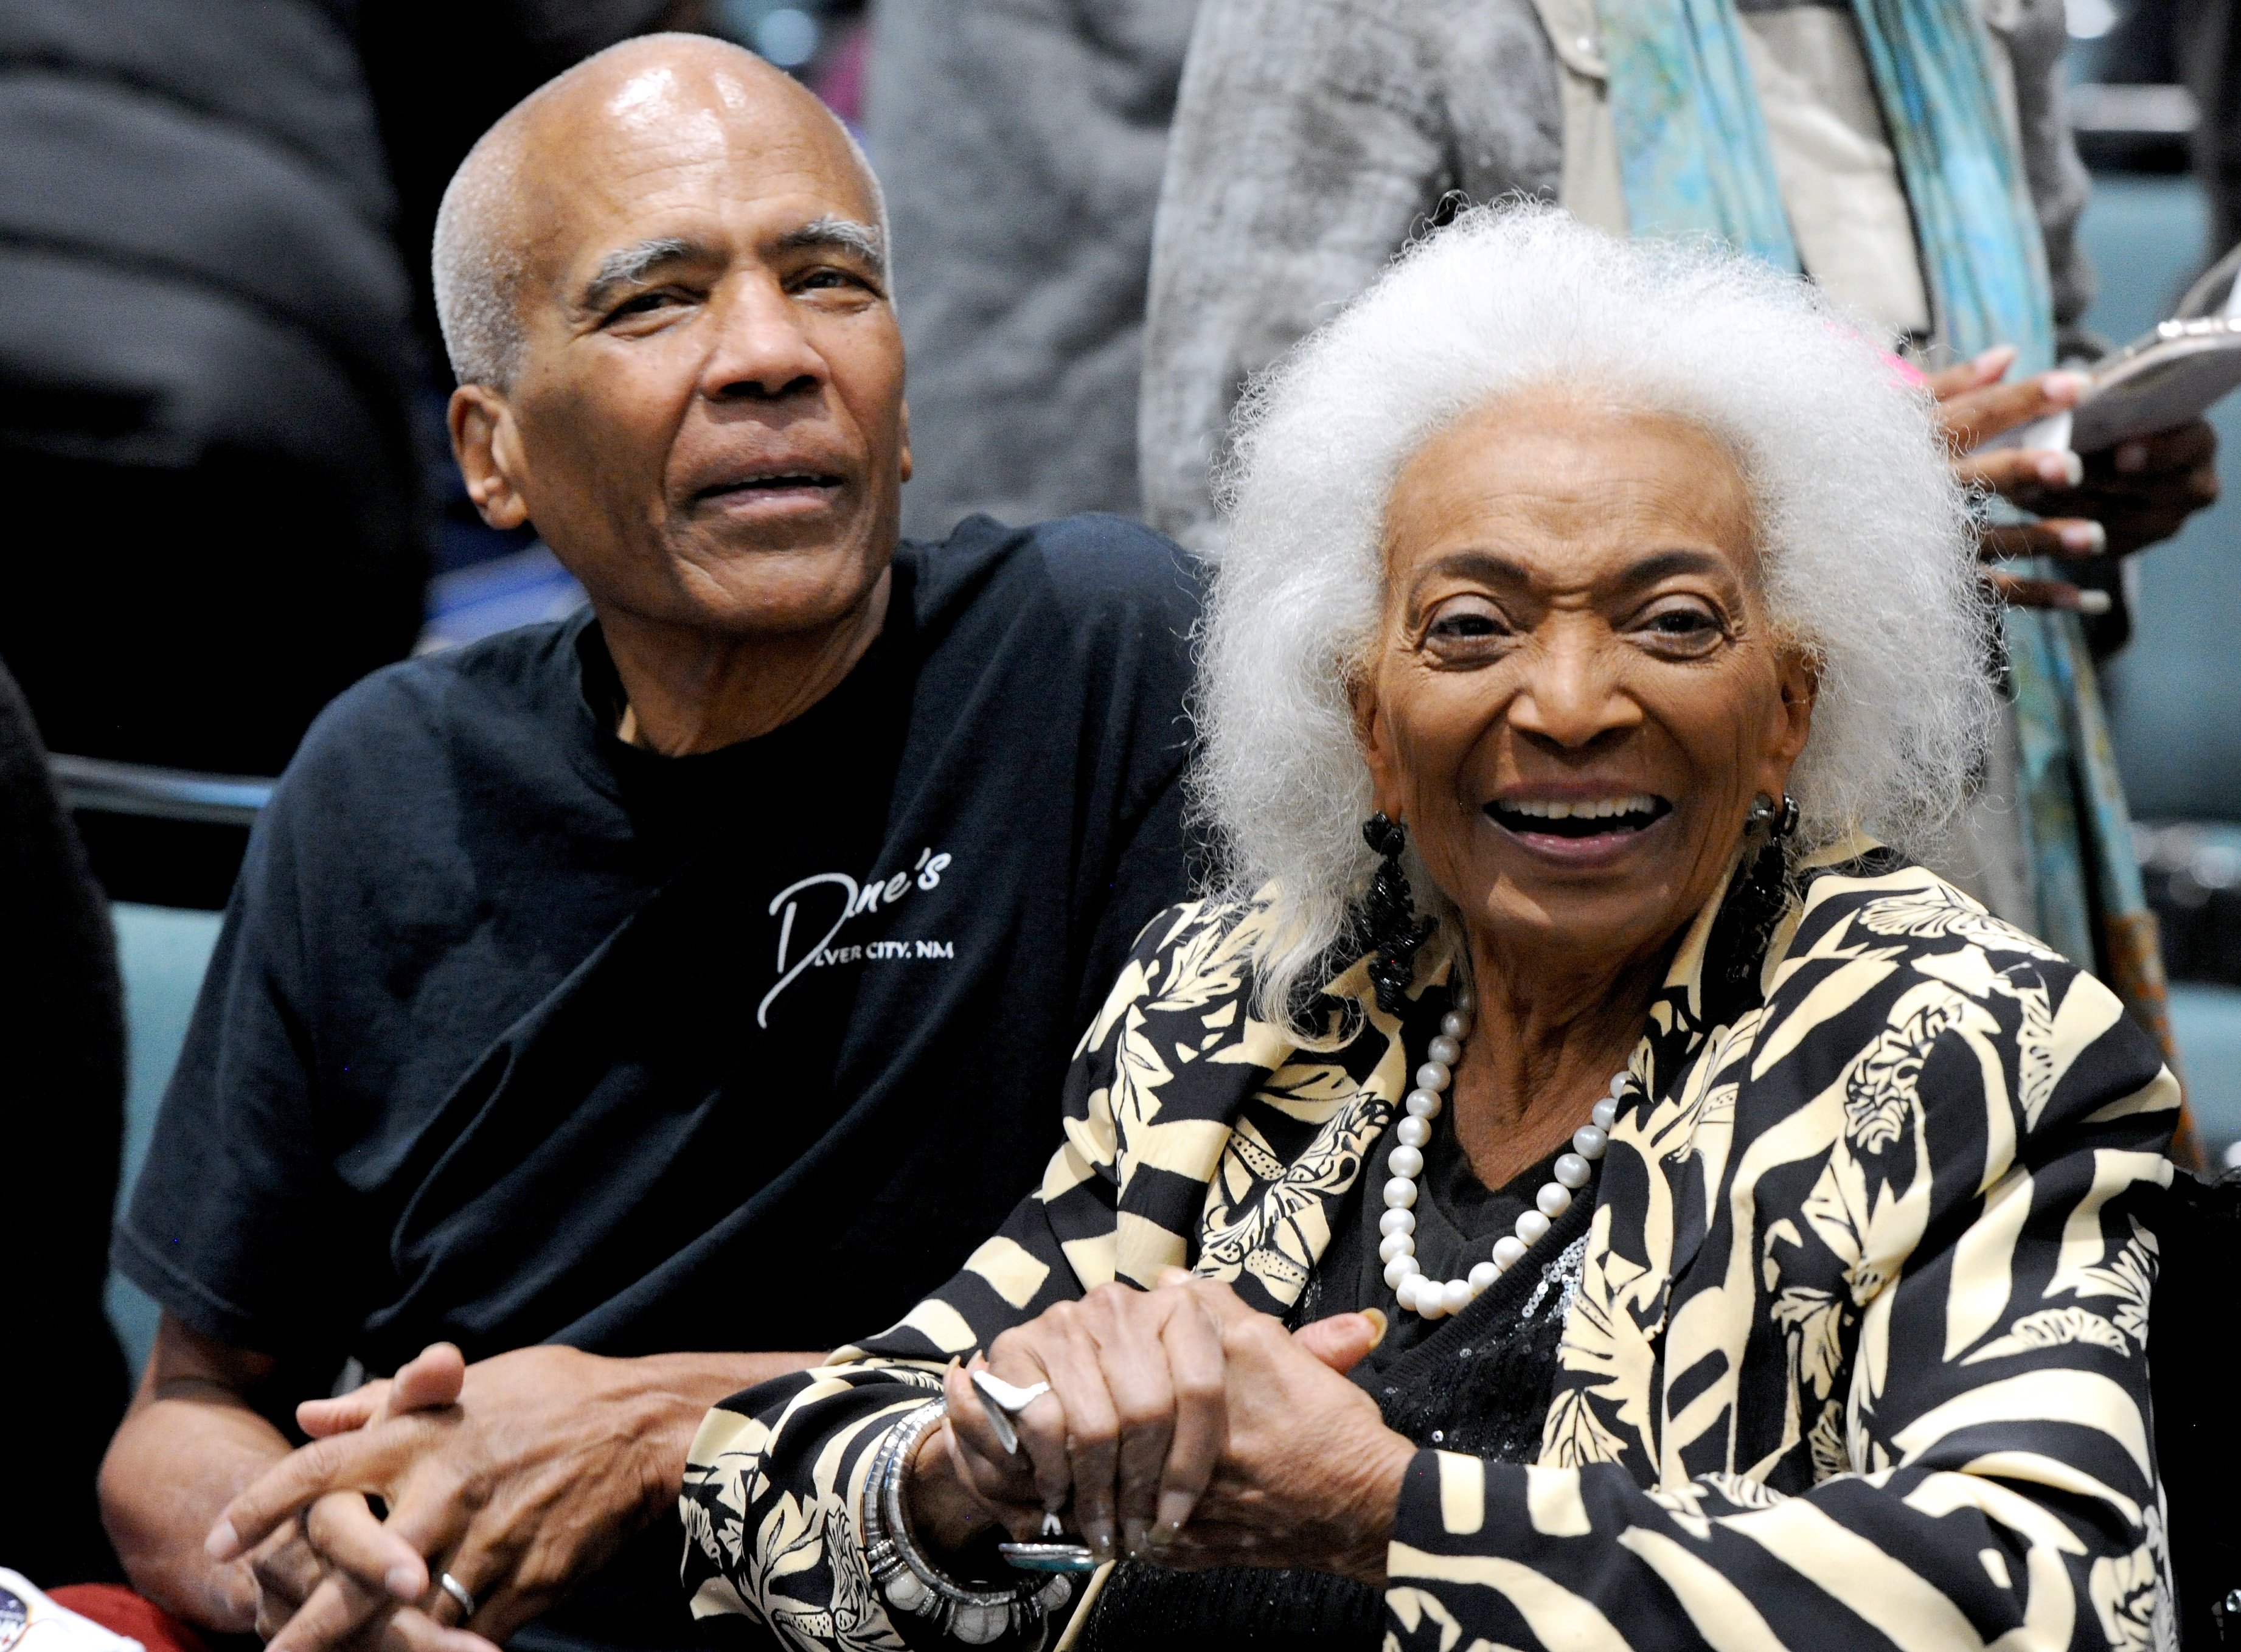 Kyle Johnson and Nichelle Nichols at the Los Angeles Comic Con on December 5, 2021, in Los Angeles, California. | Source: Getty Images